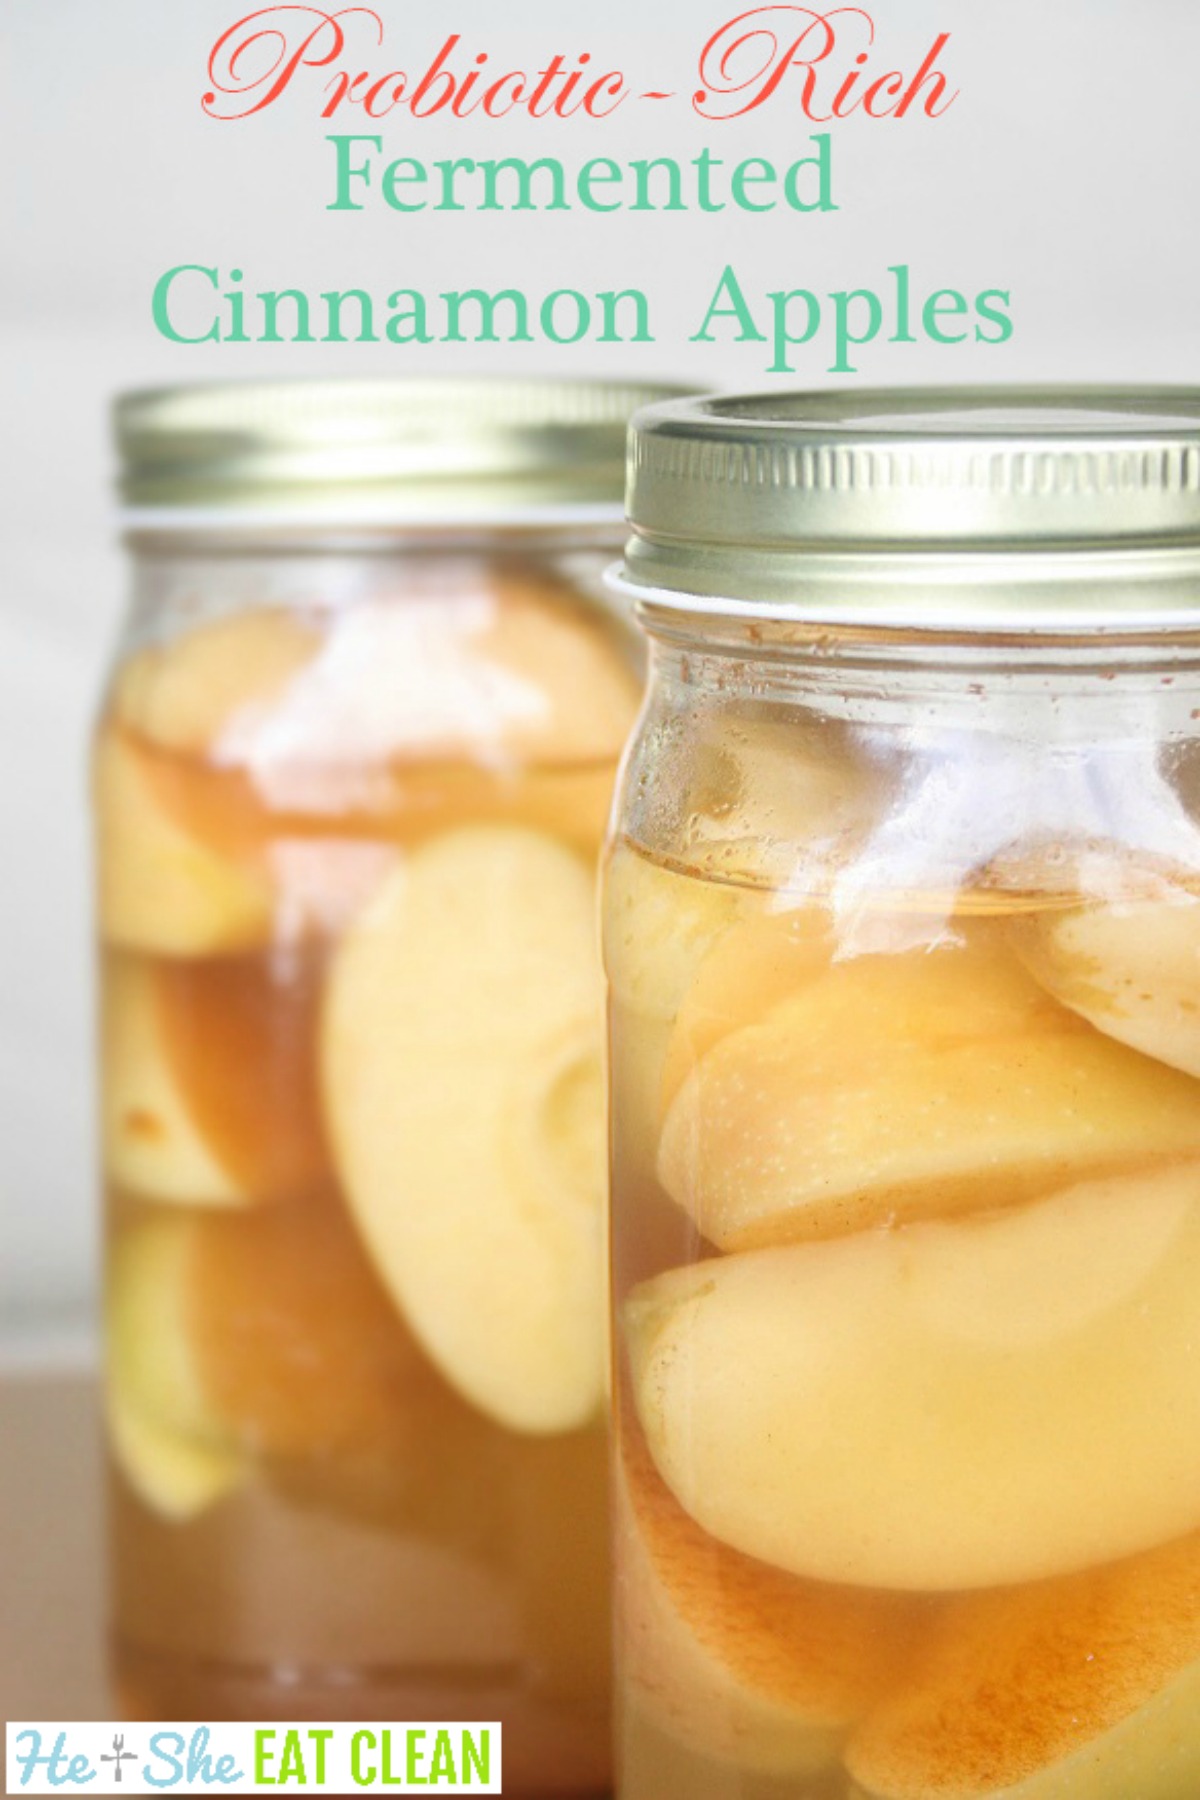 sliced apples fermenting in a clear jar